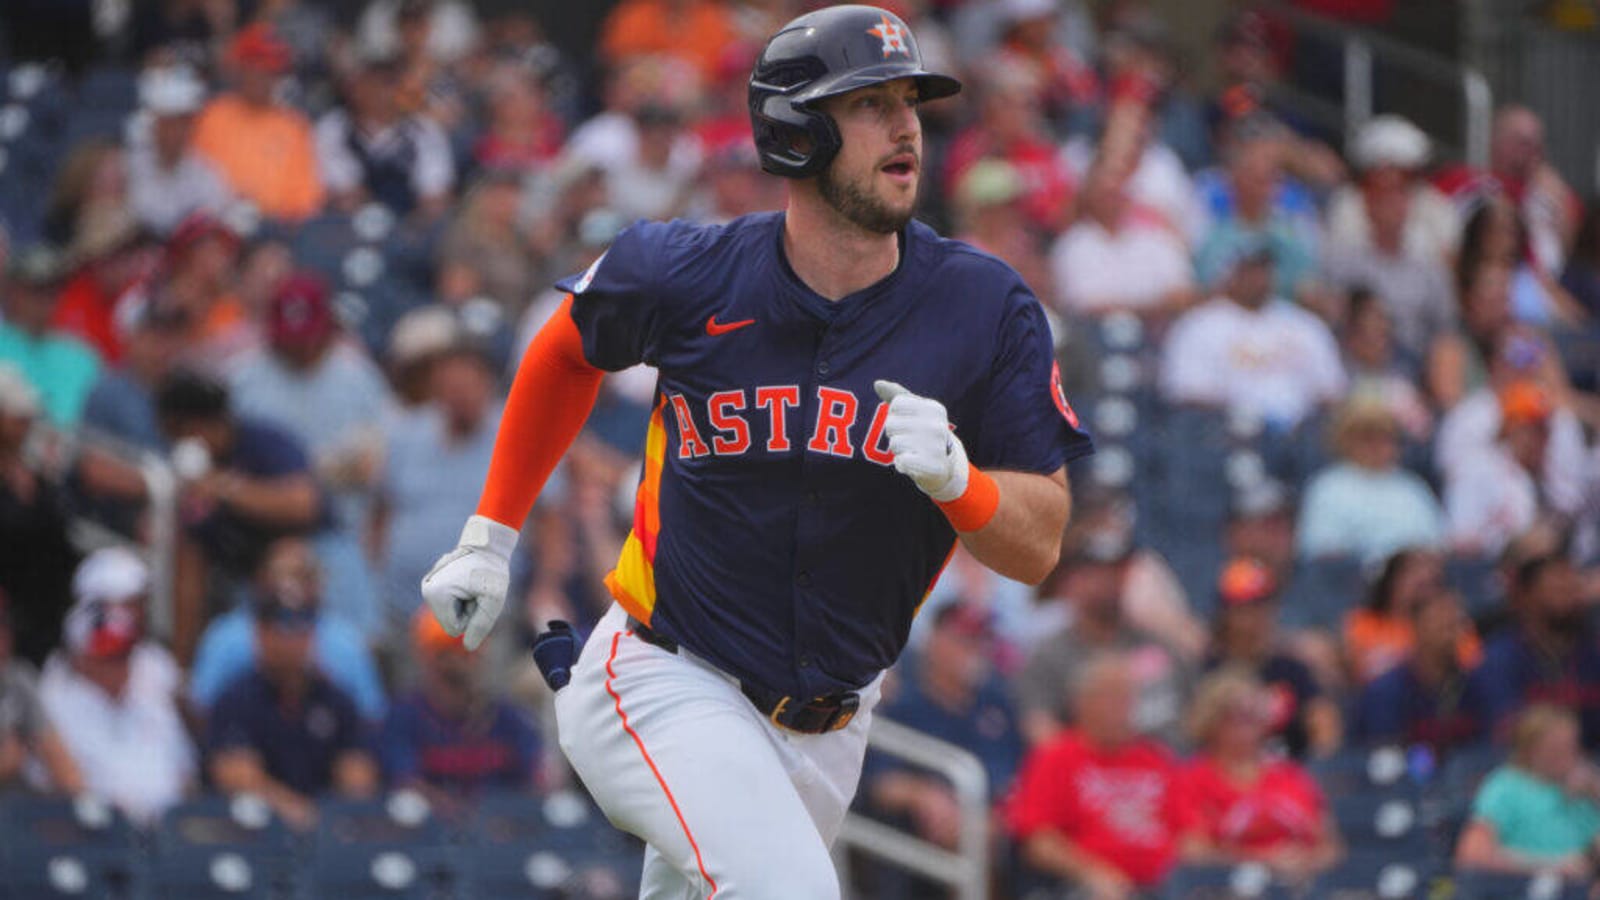 How to watch New York Mets vs Houston Astros via free live stream: MLB Spring Training online, preview, start time and TV channel